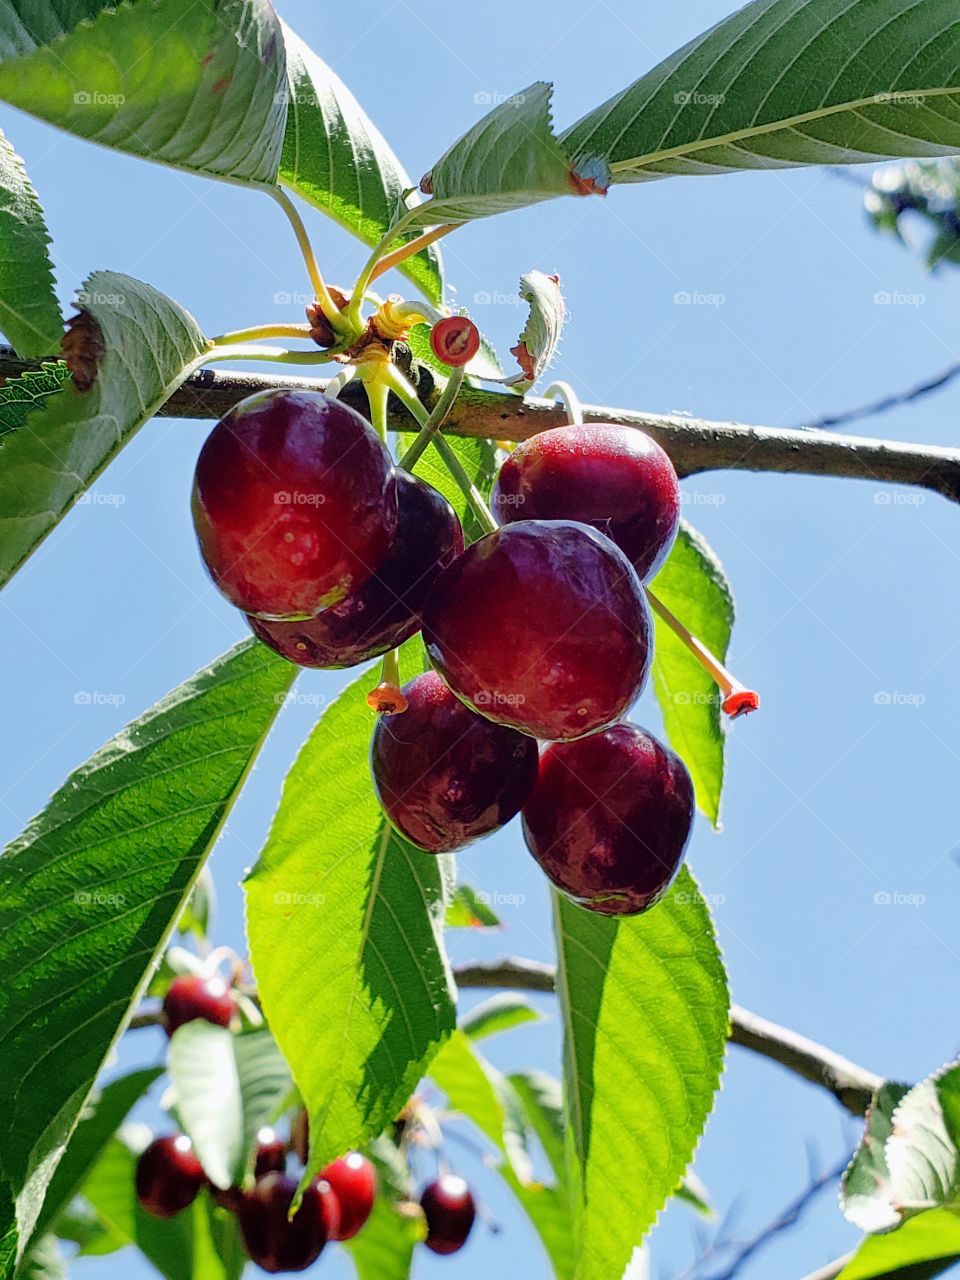 Plump, delicious bright red cherries hang from a tree in an orchard in Oregon’s Willamette Valley on a sunny summer day. 